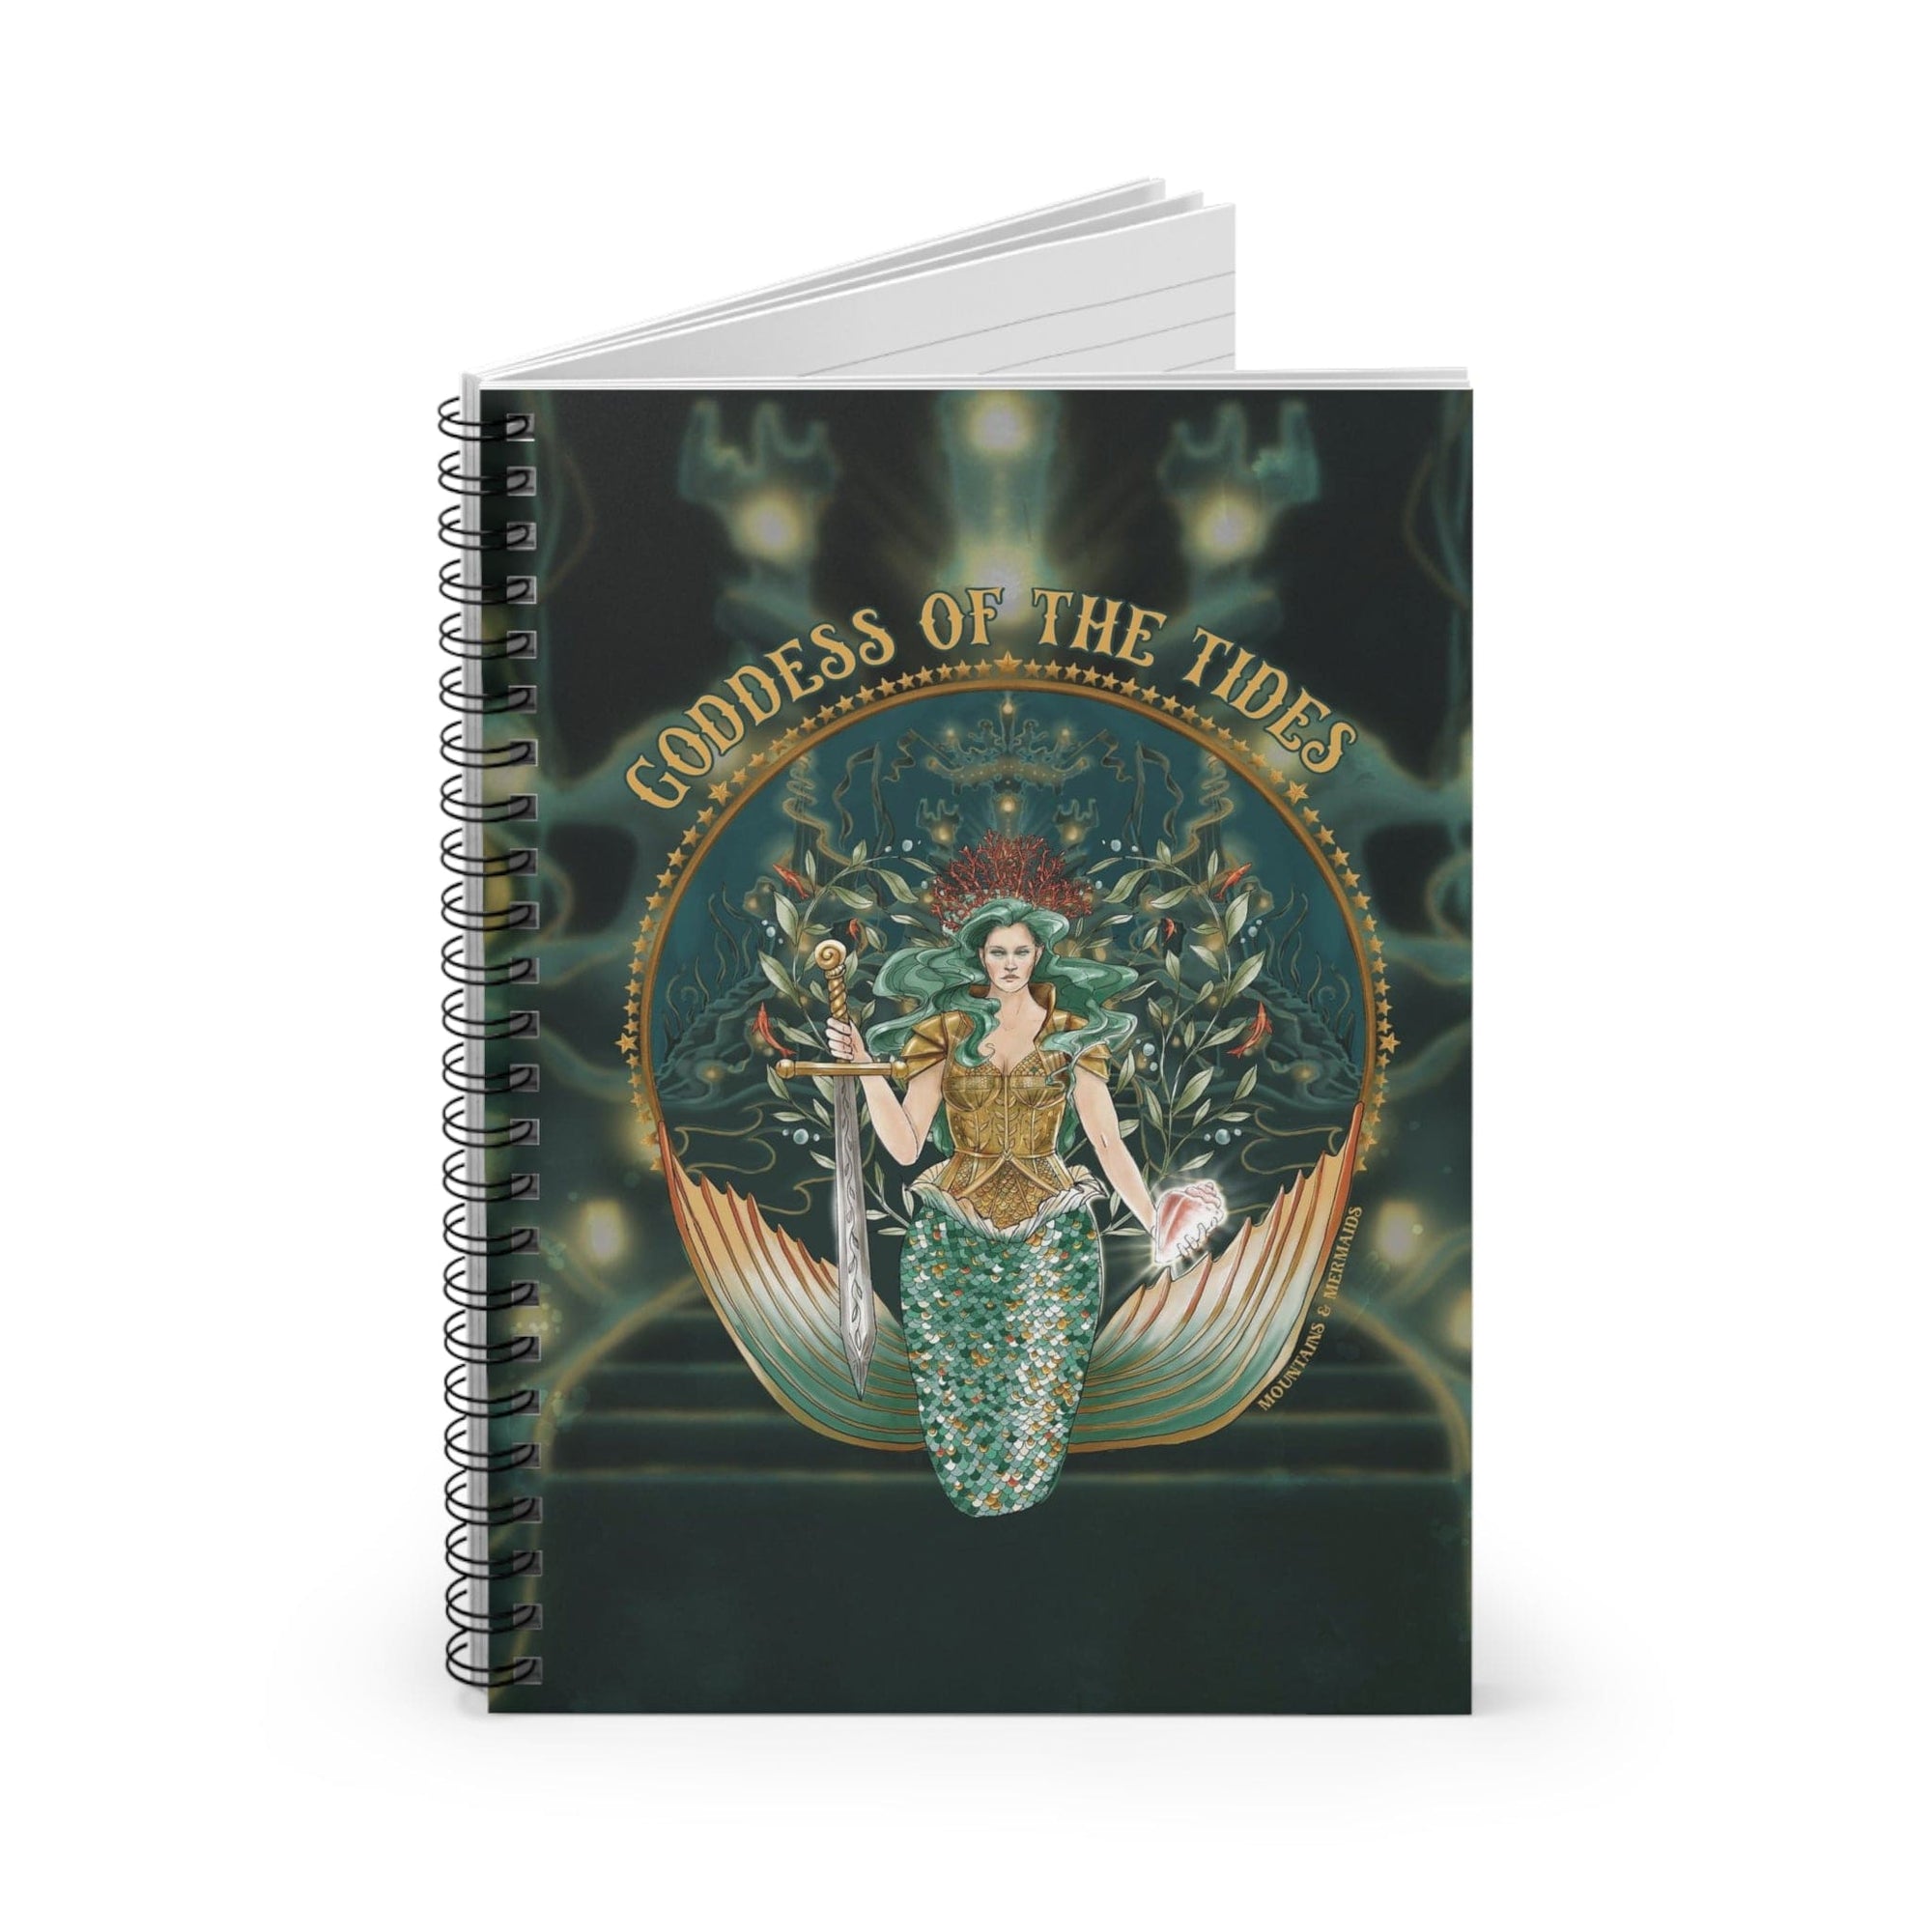 Goddess Of The Tides Spiral Notebook - Ruled Line - Mountains & Mermaids